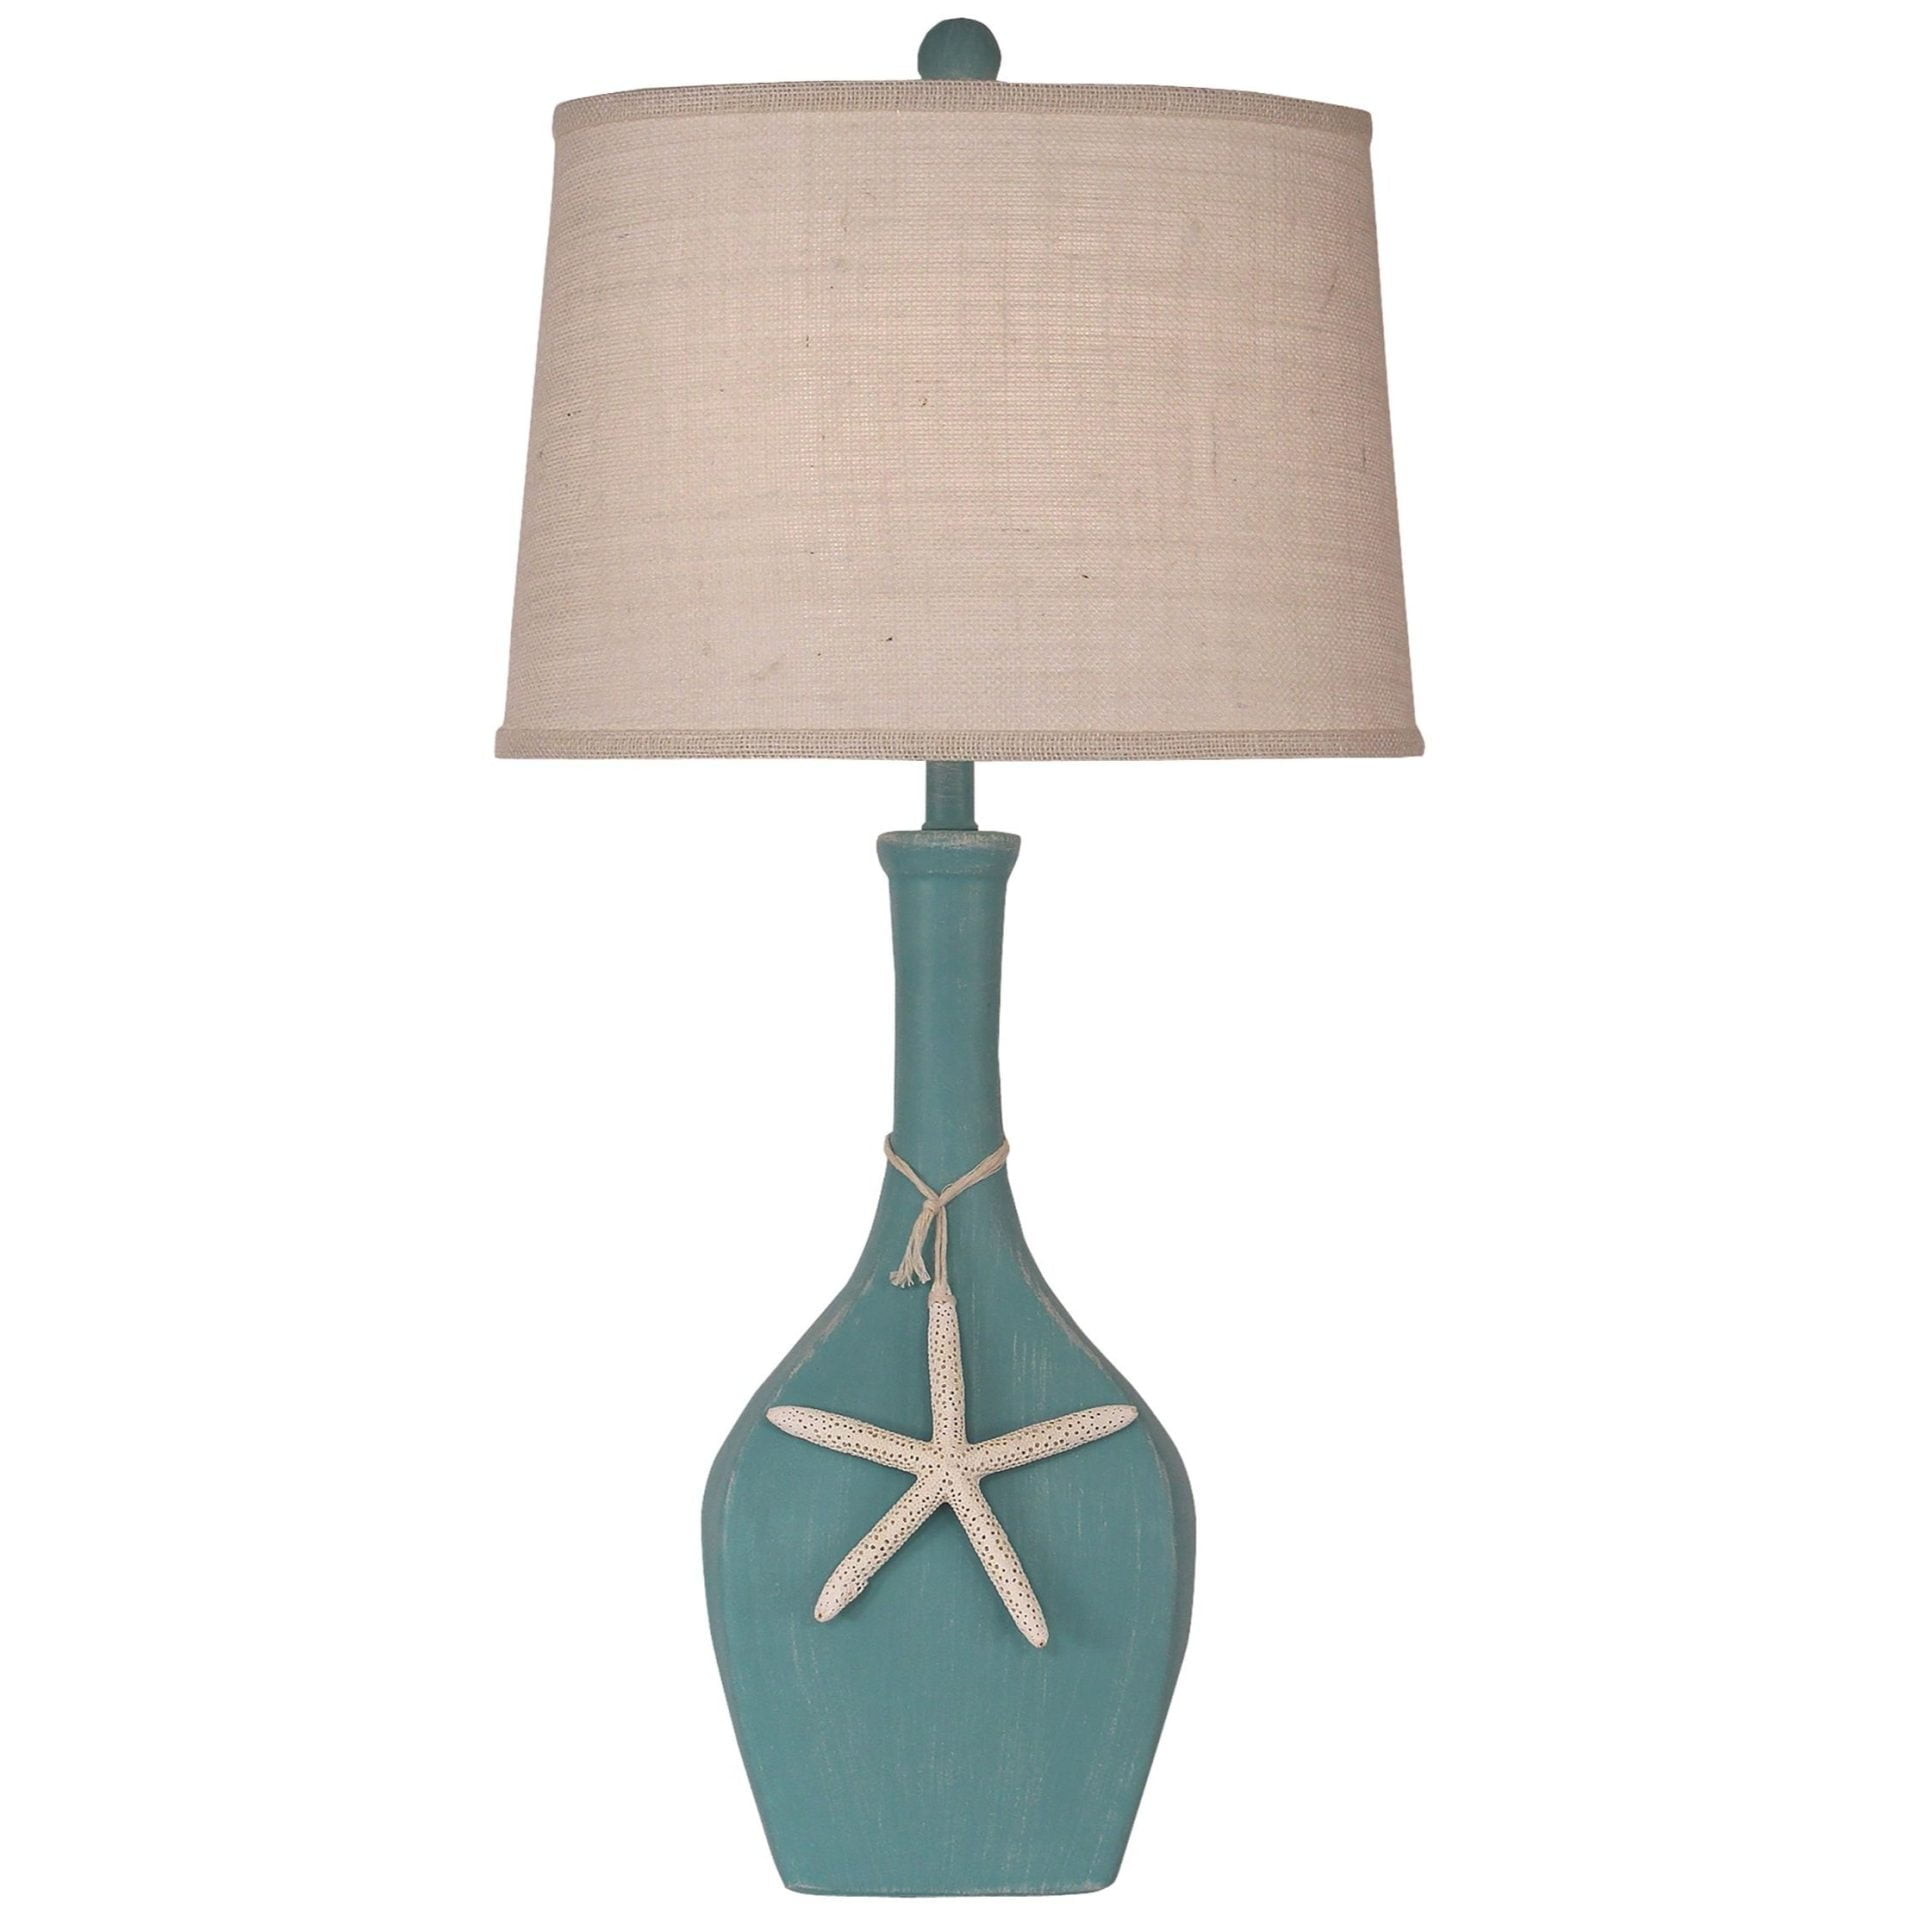 Oval Genie Table Lamp with Starfish Accent